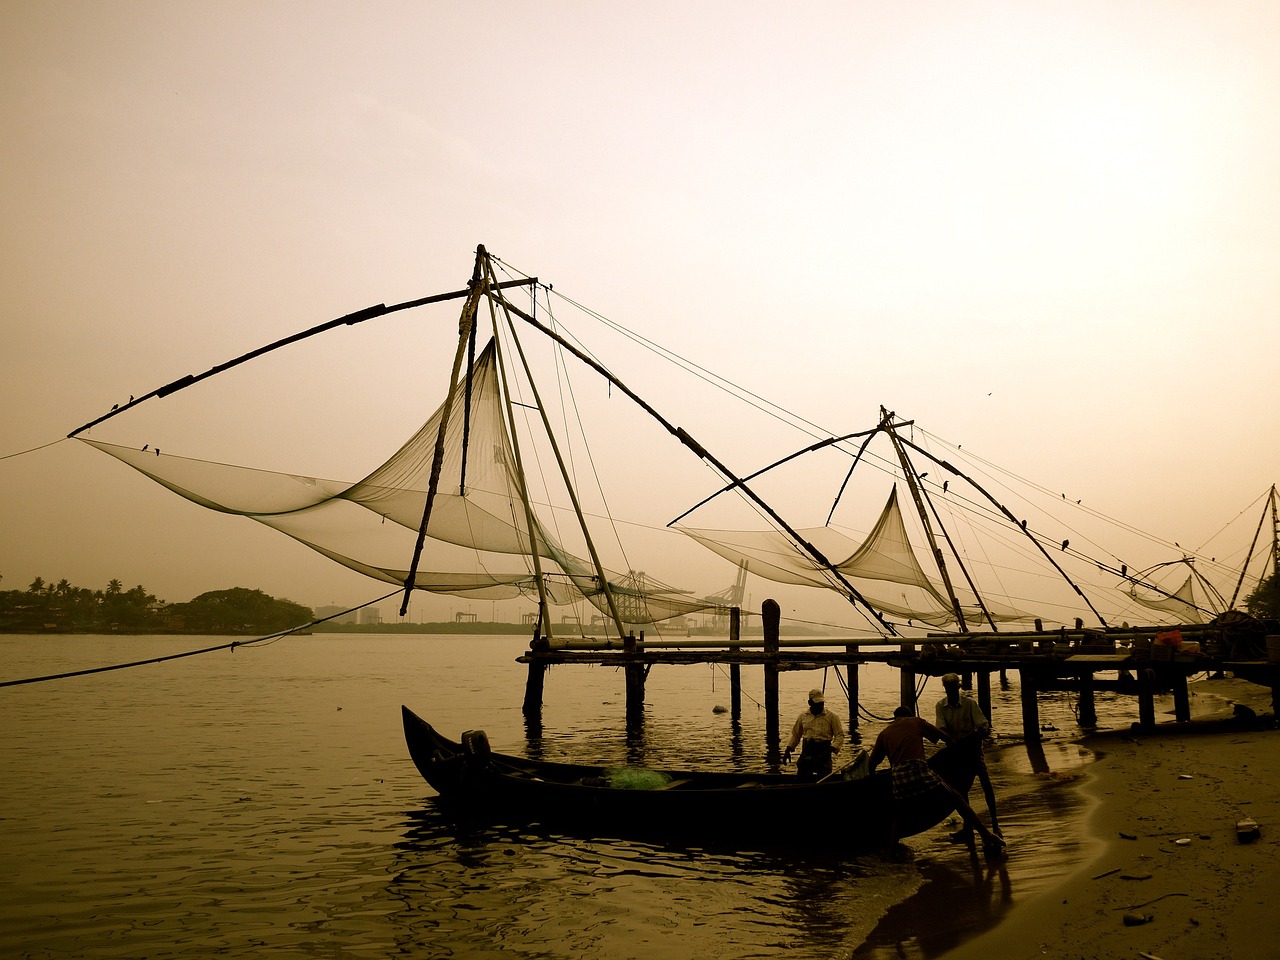 5-Day Kerala Adventure with Kochi, Munnar, and Alleppey